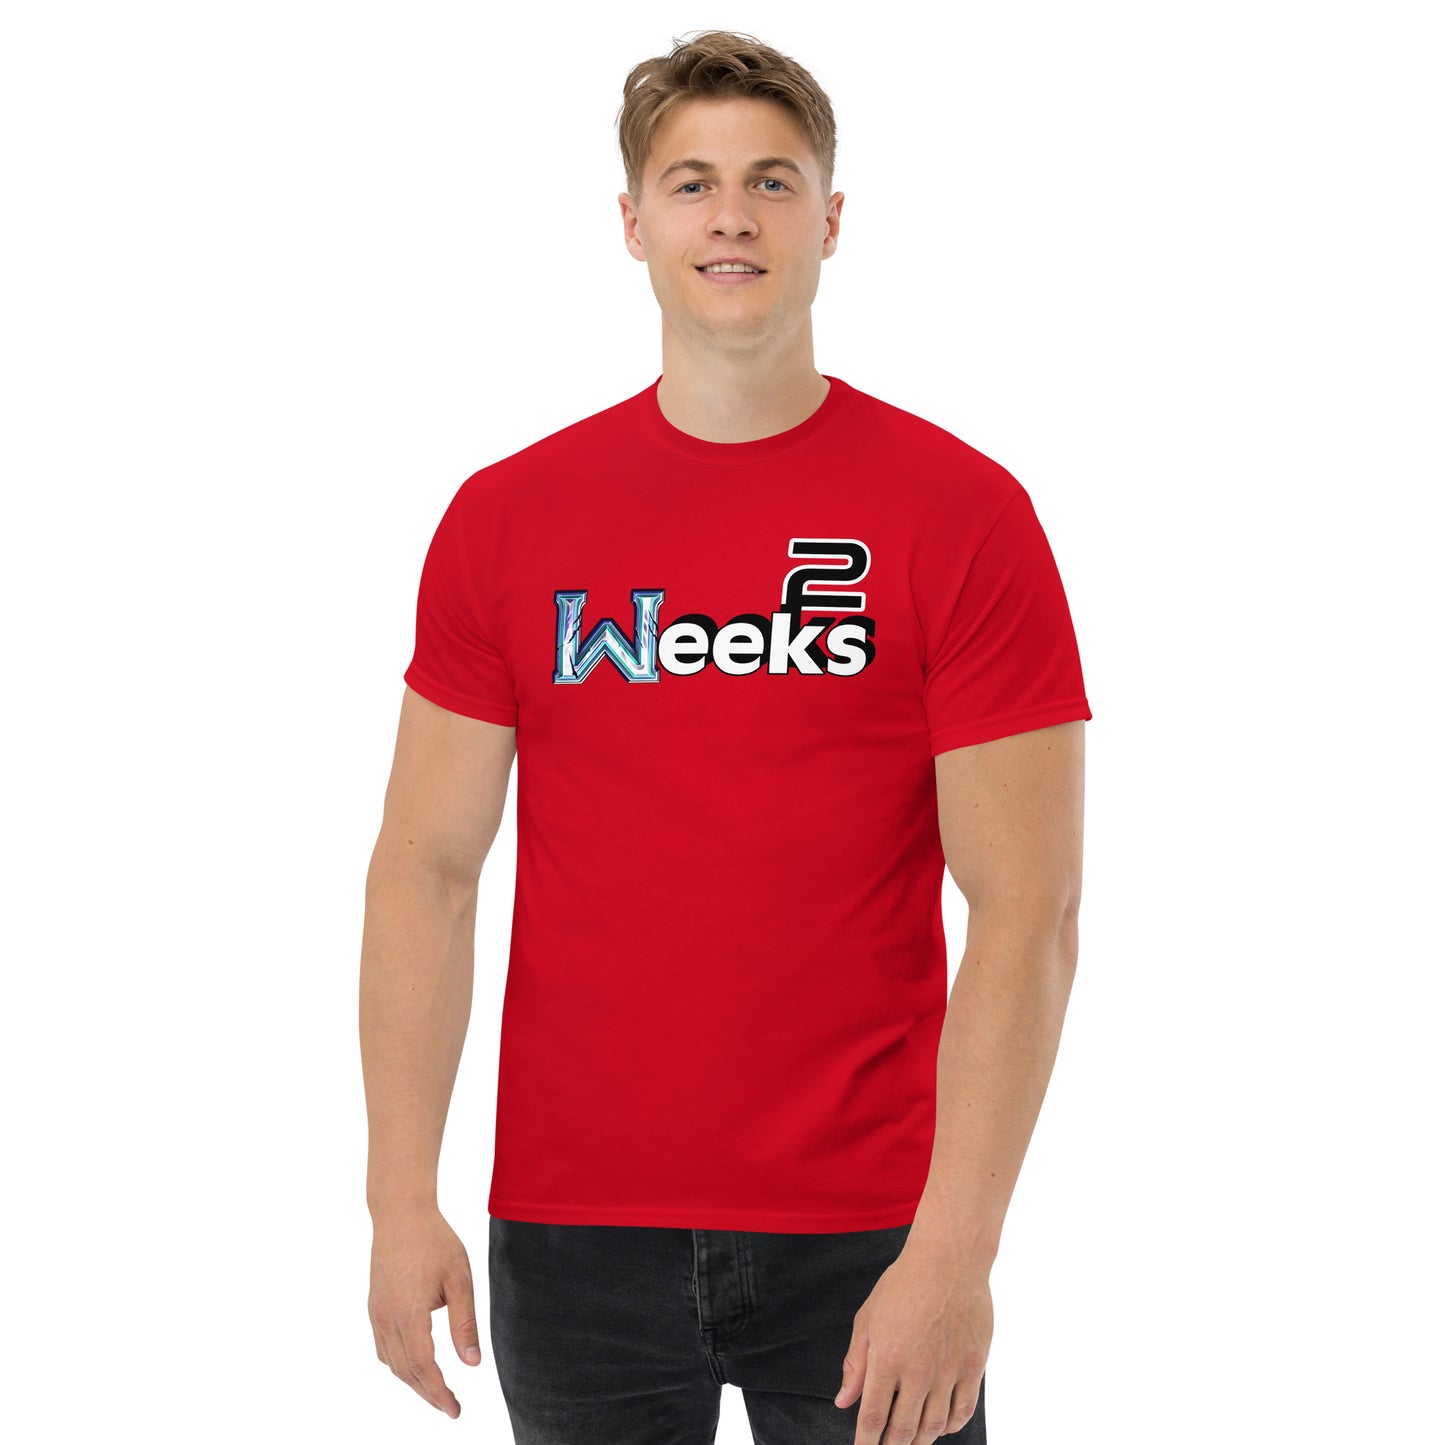 Two Weeks Men's Classic T-Shirt